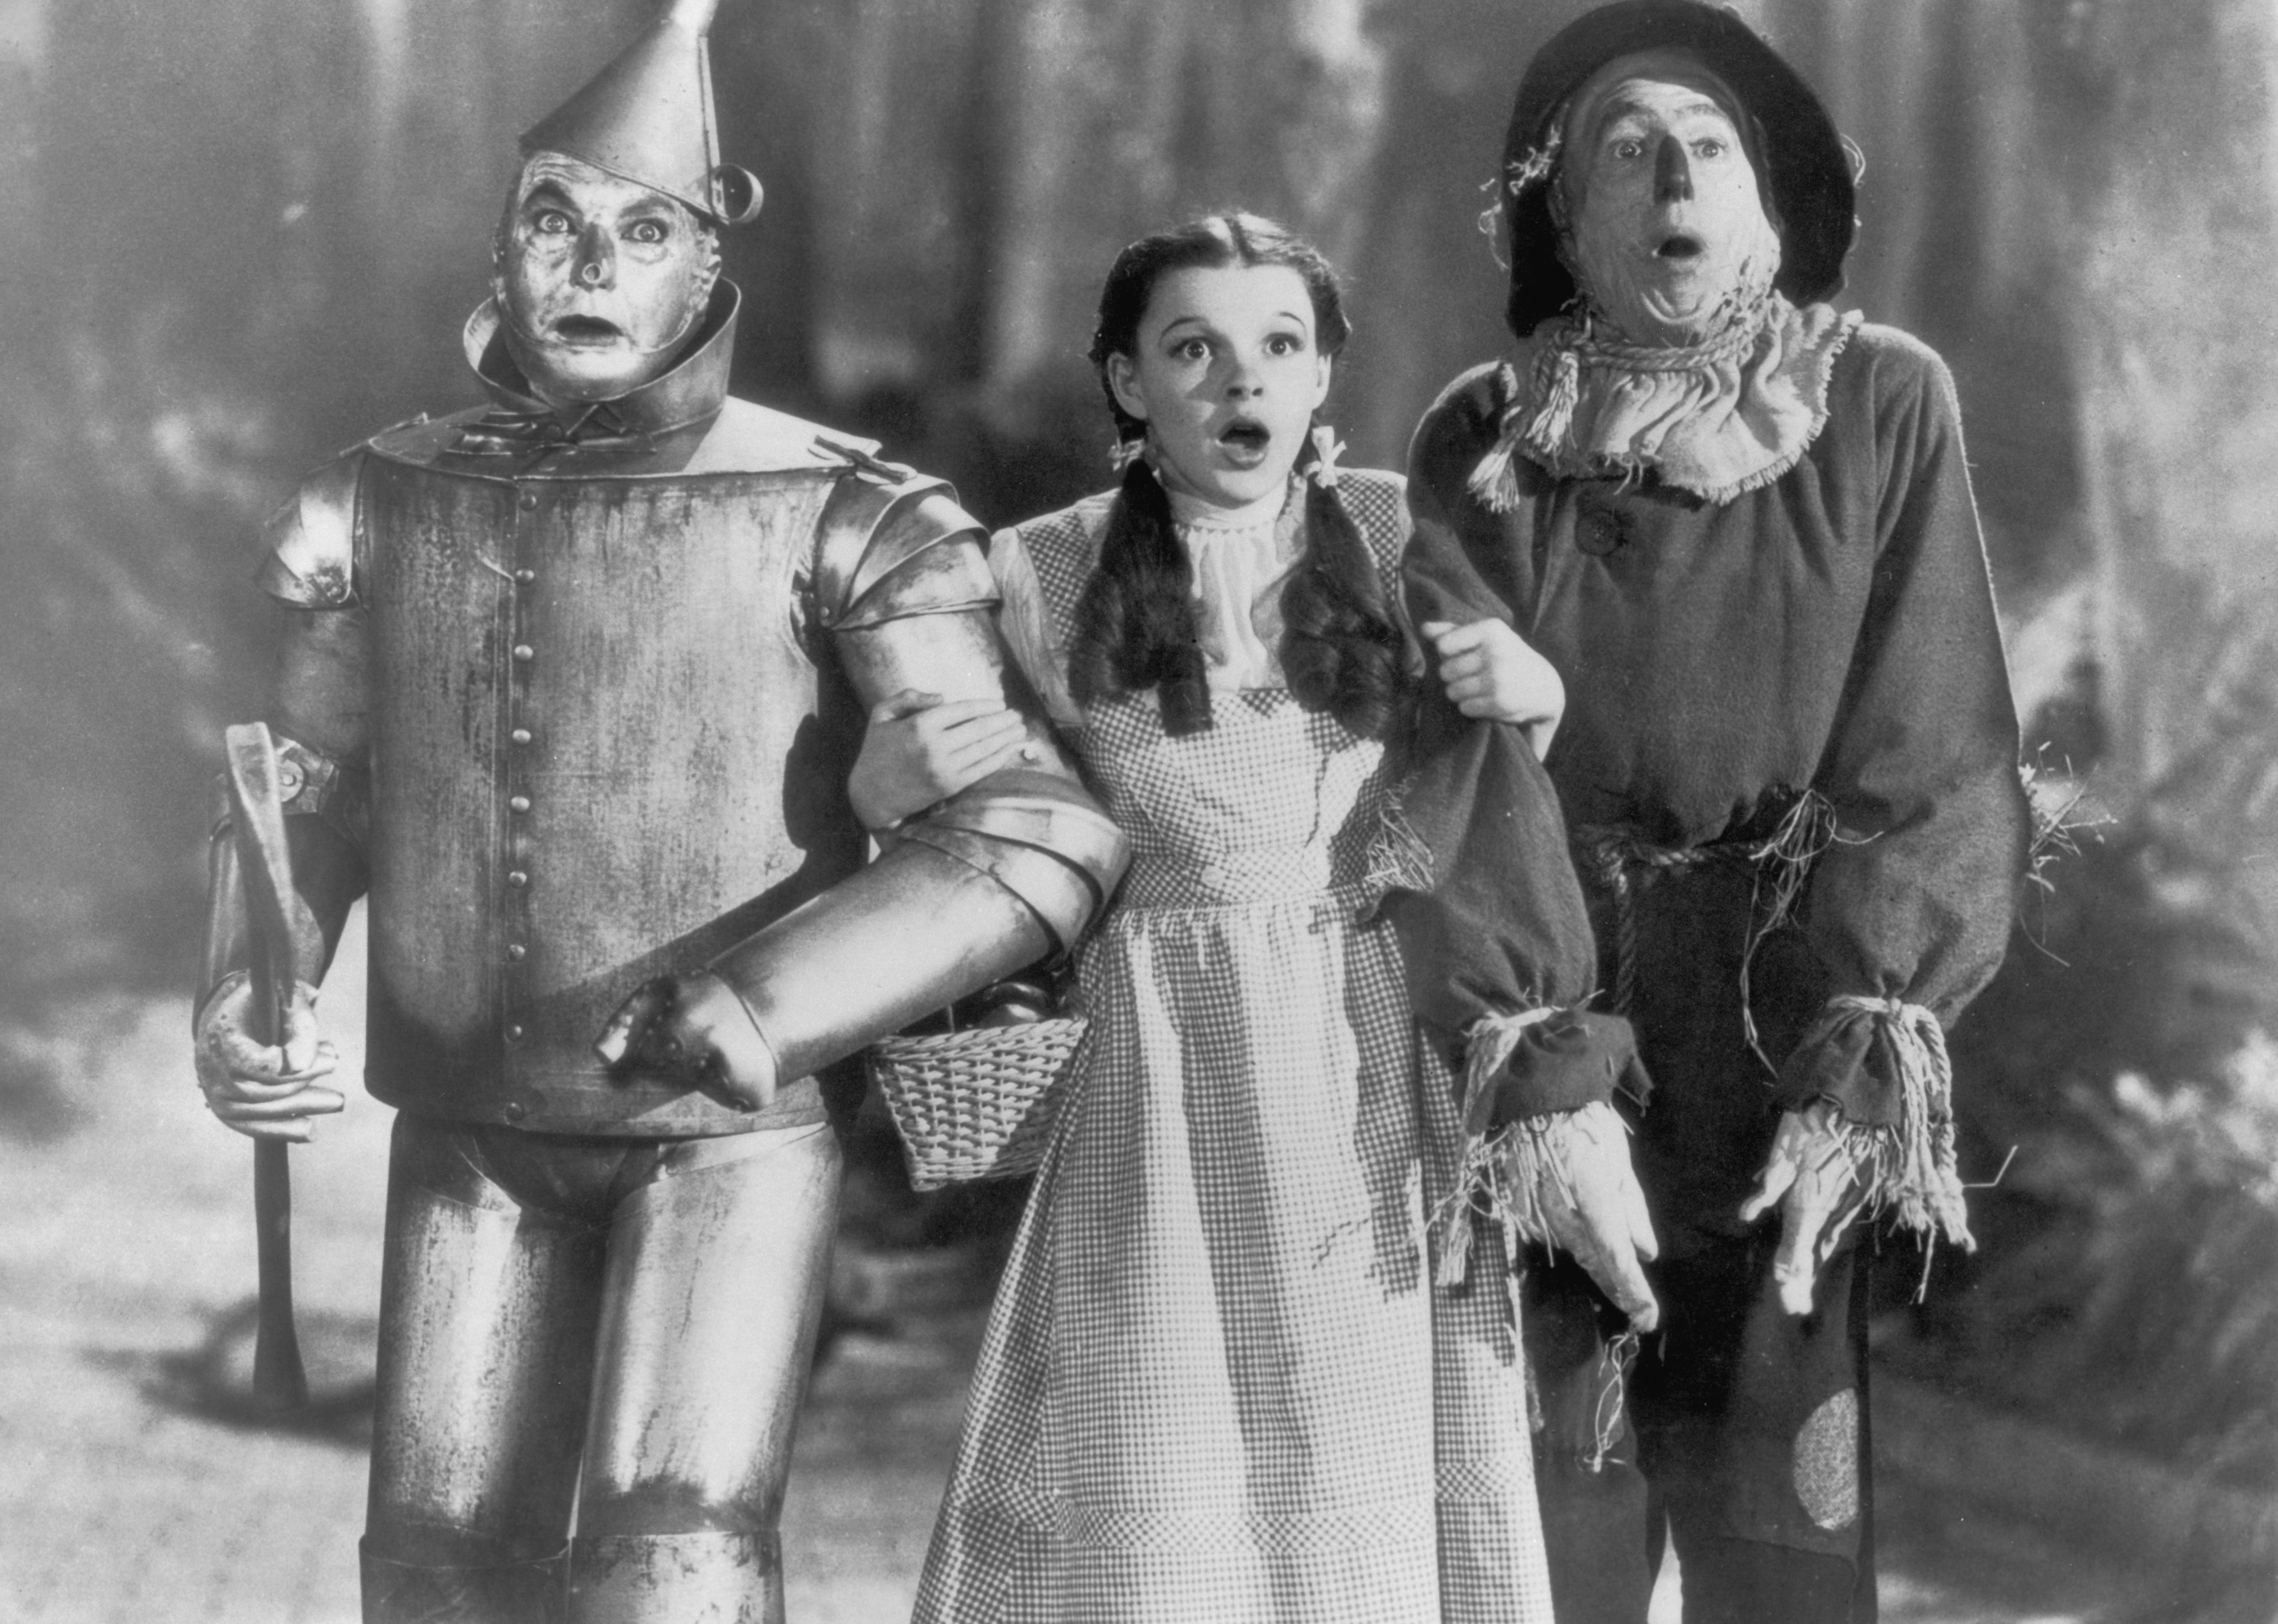 Judy Garland with the Tinman and Scarecrow in The Wizard of Oz.